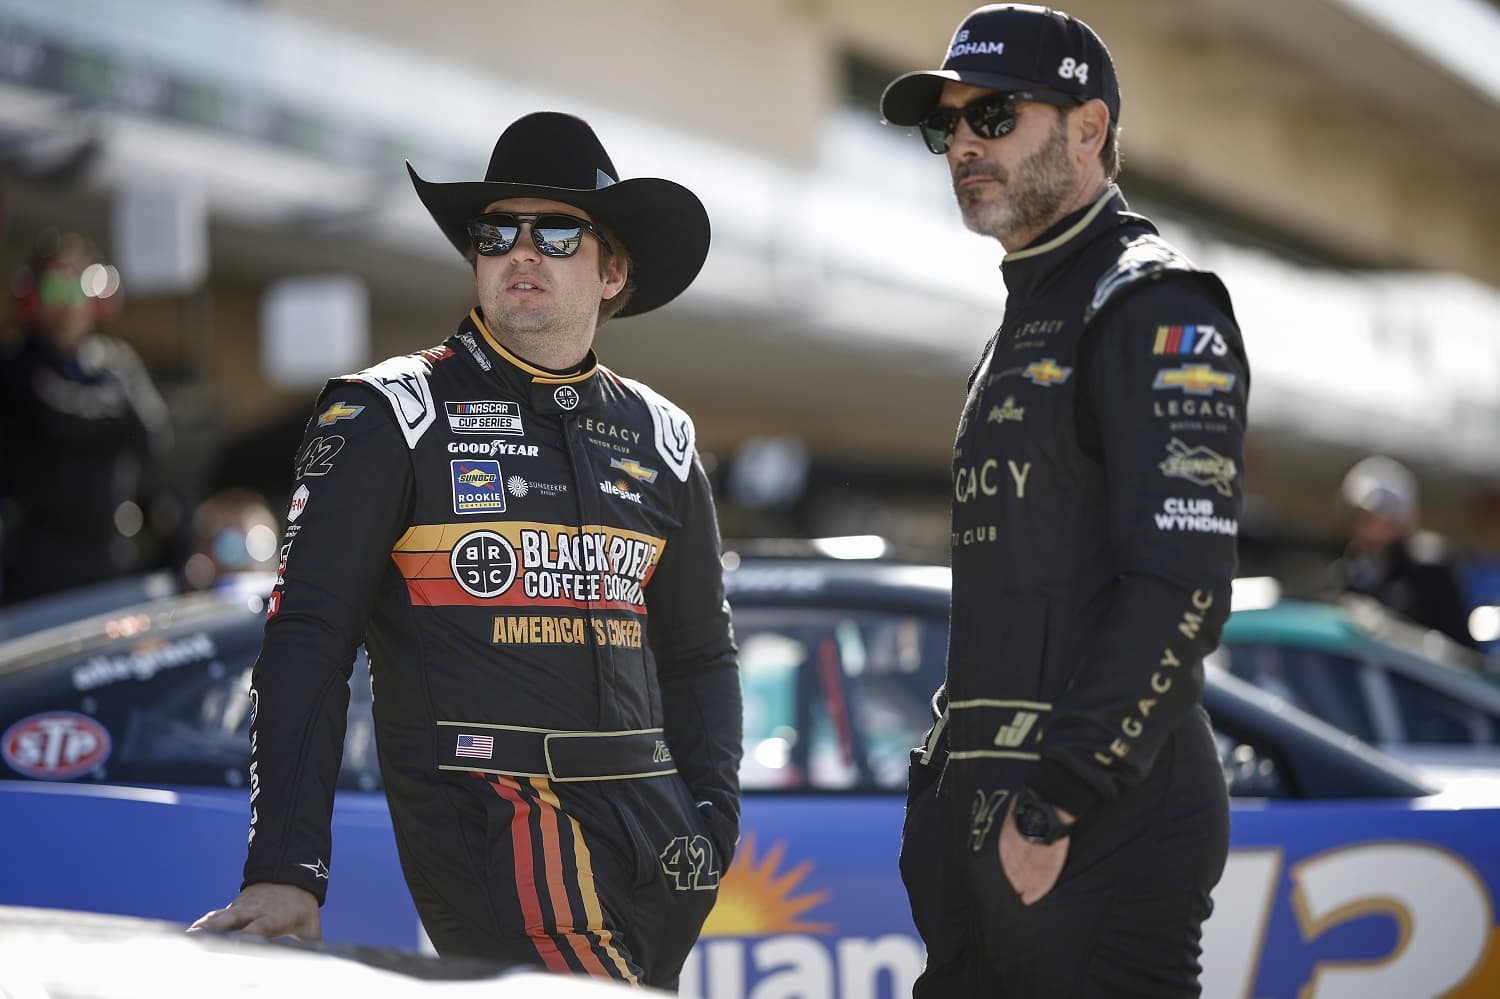 Noah Gragson and Jimmie Johnson of Legacy Motor Club look on in the garage area during qualifying for the NASCAR Cup Series EchoPark Automotive Grand Prix at Circuit of The Americas on March 25, 2023 in Austin, Texas.